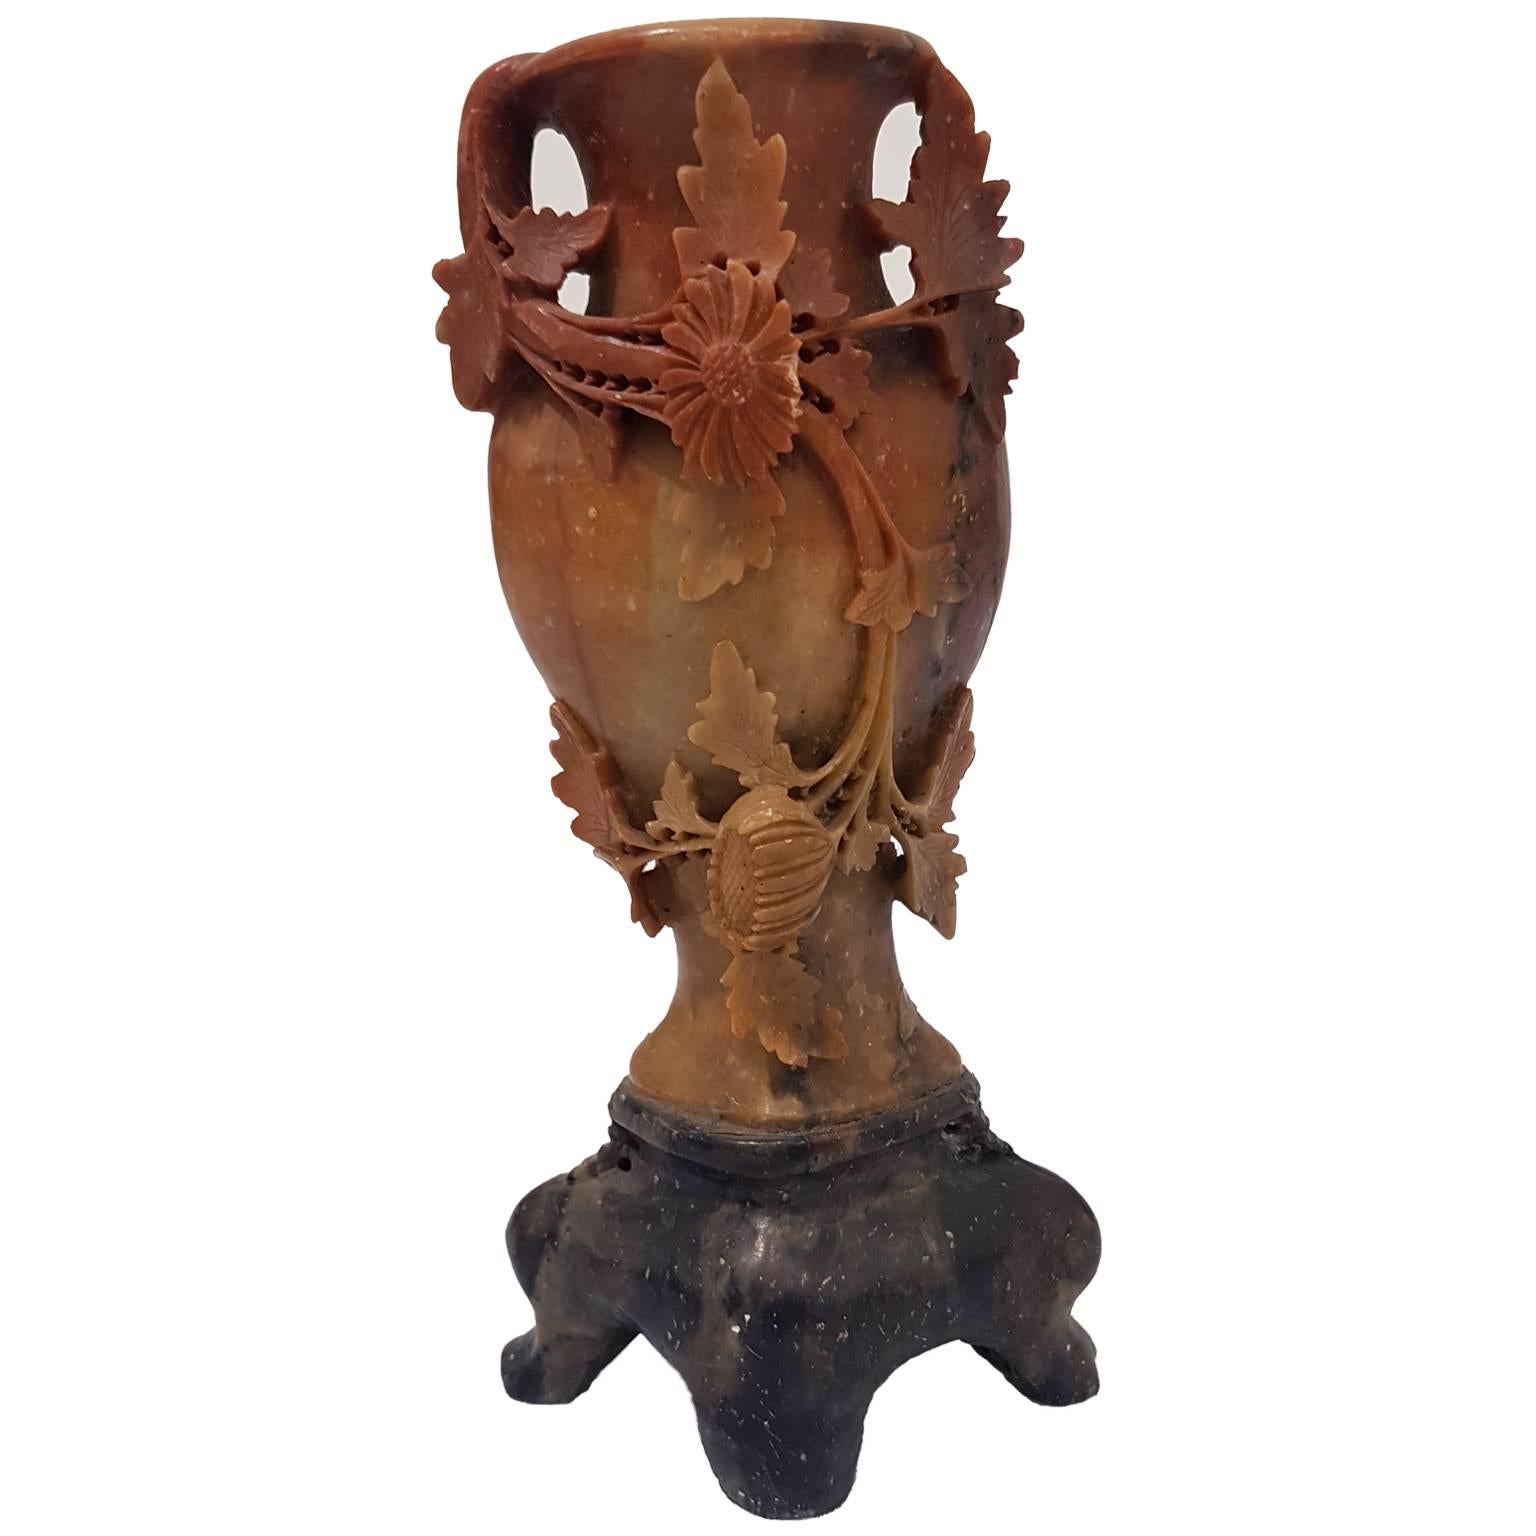 Little Amphora in precious stone, the carvings are an intricate floral design. 

Provenance: China, circa 1930.

Very good conditions.

This artwork is shipped from Italy. Under existing legislation, any artwork in Italy created over 70 years